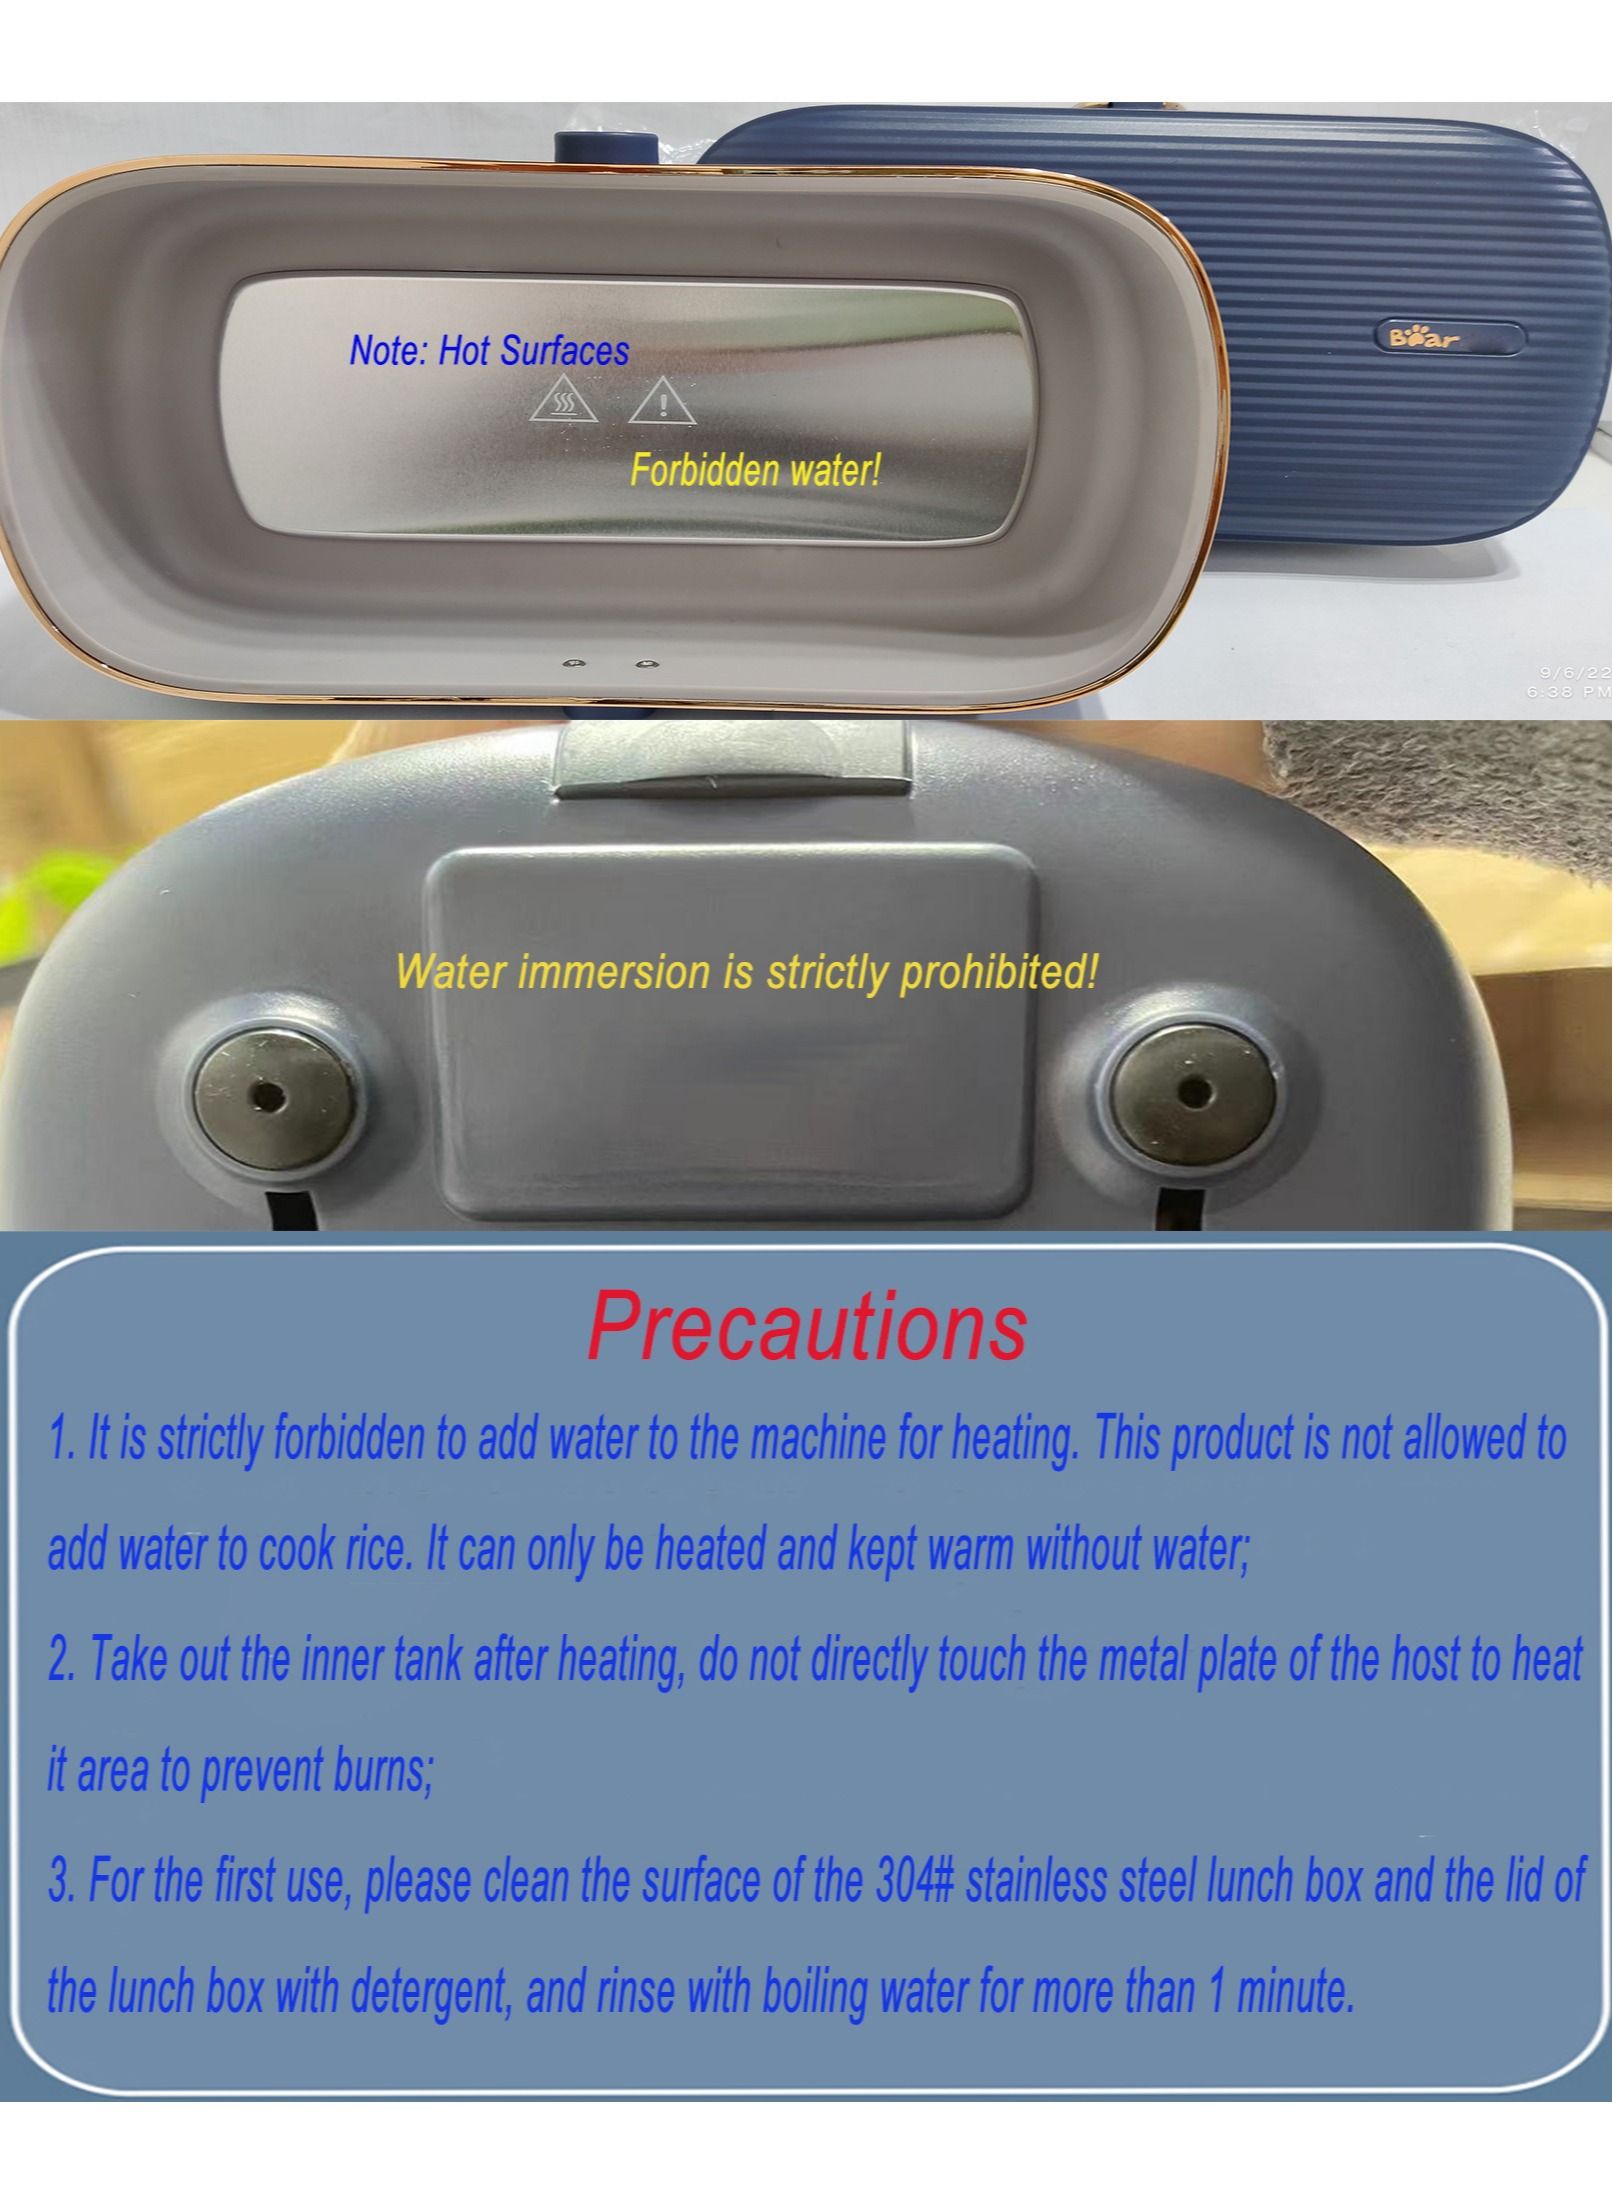 Bear Portable Electric Lunch Box Food Heater Stainless Steel Automatic Food Warmer Heat Preservation & Self-Heating Insulation Lunch Box For Men Women Office Outdoor 